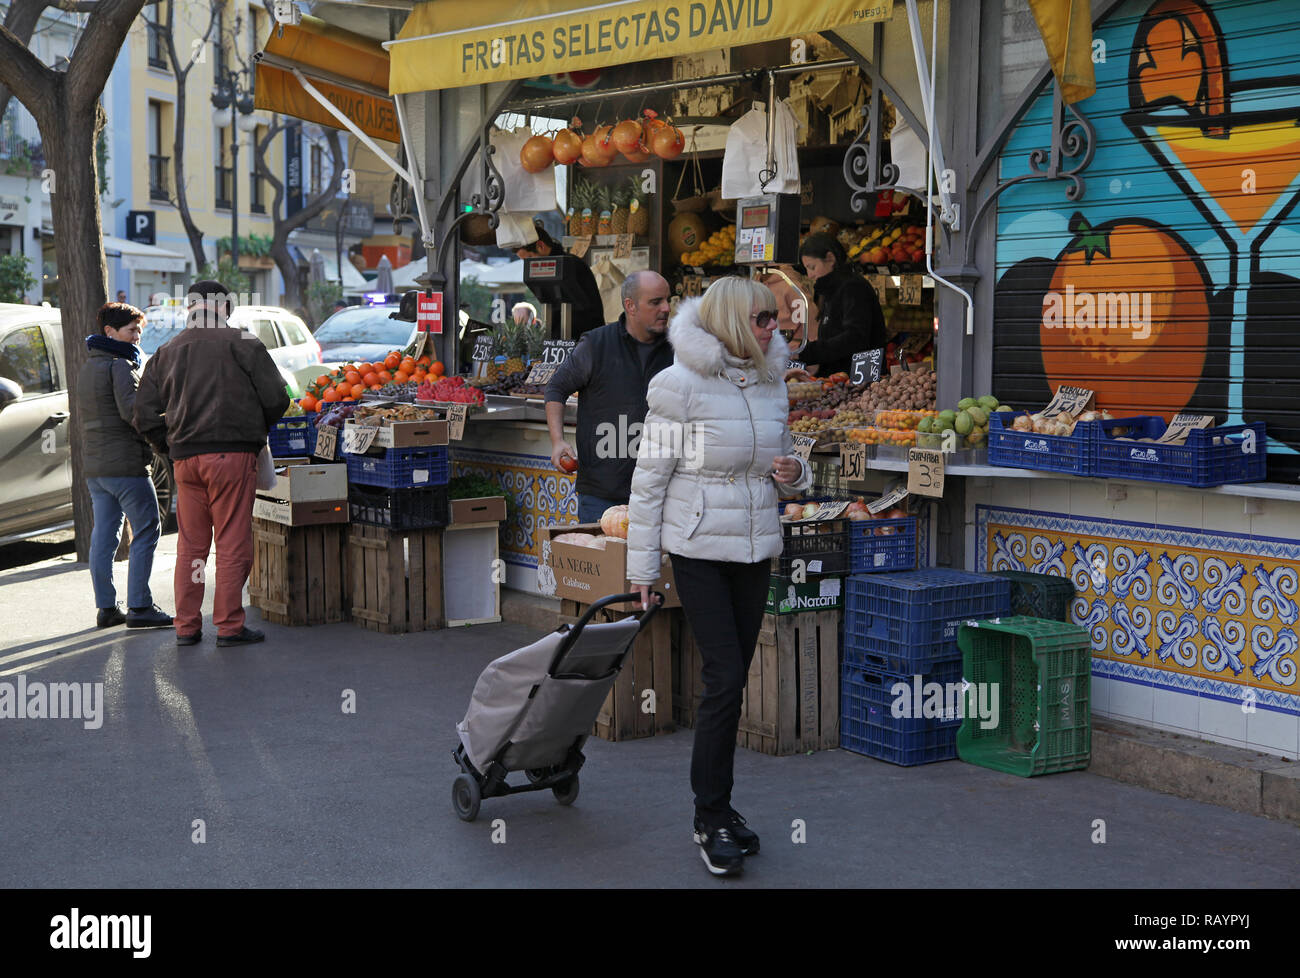 Outside the Central market or Mercado Central in the city of Valencia Spain Stock Photo